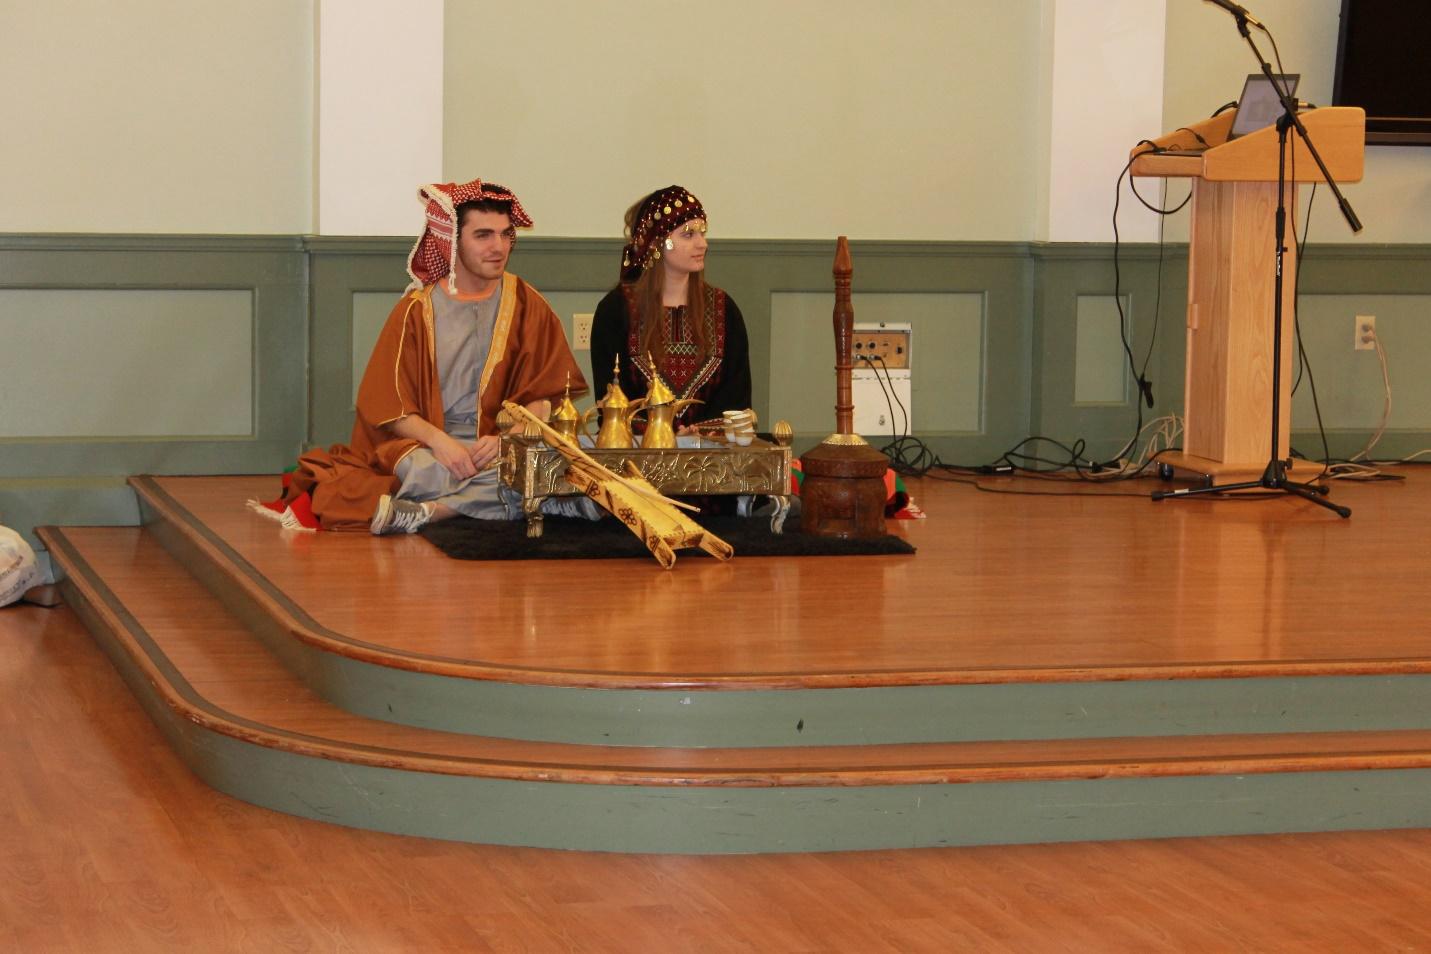 Two students in traditional Arabic clothing sit on a hardwood stage